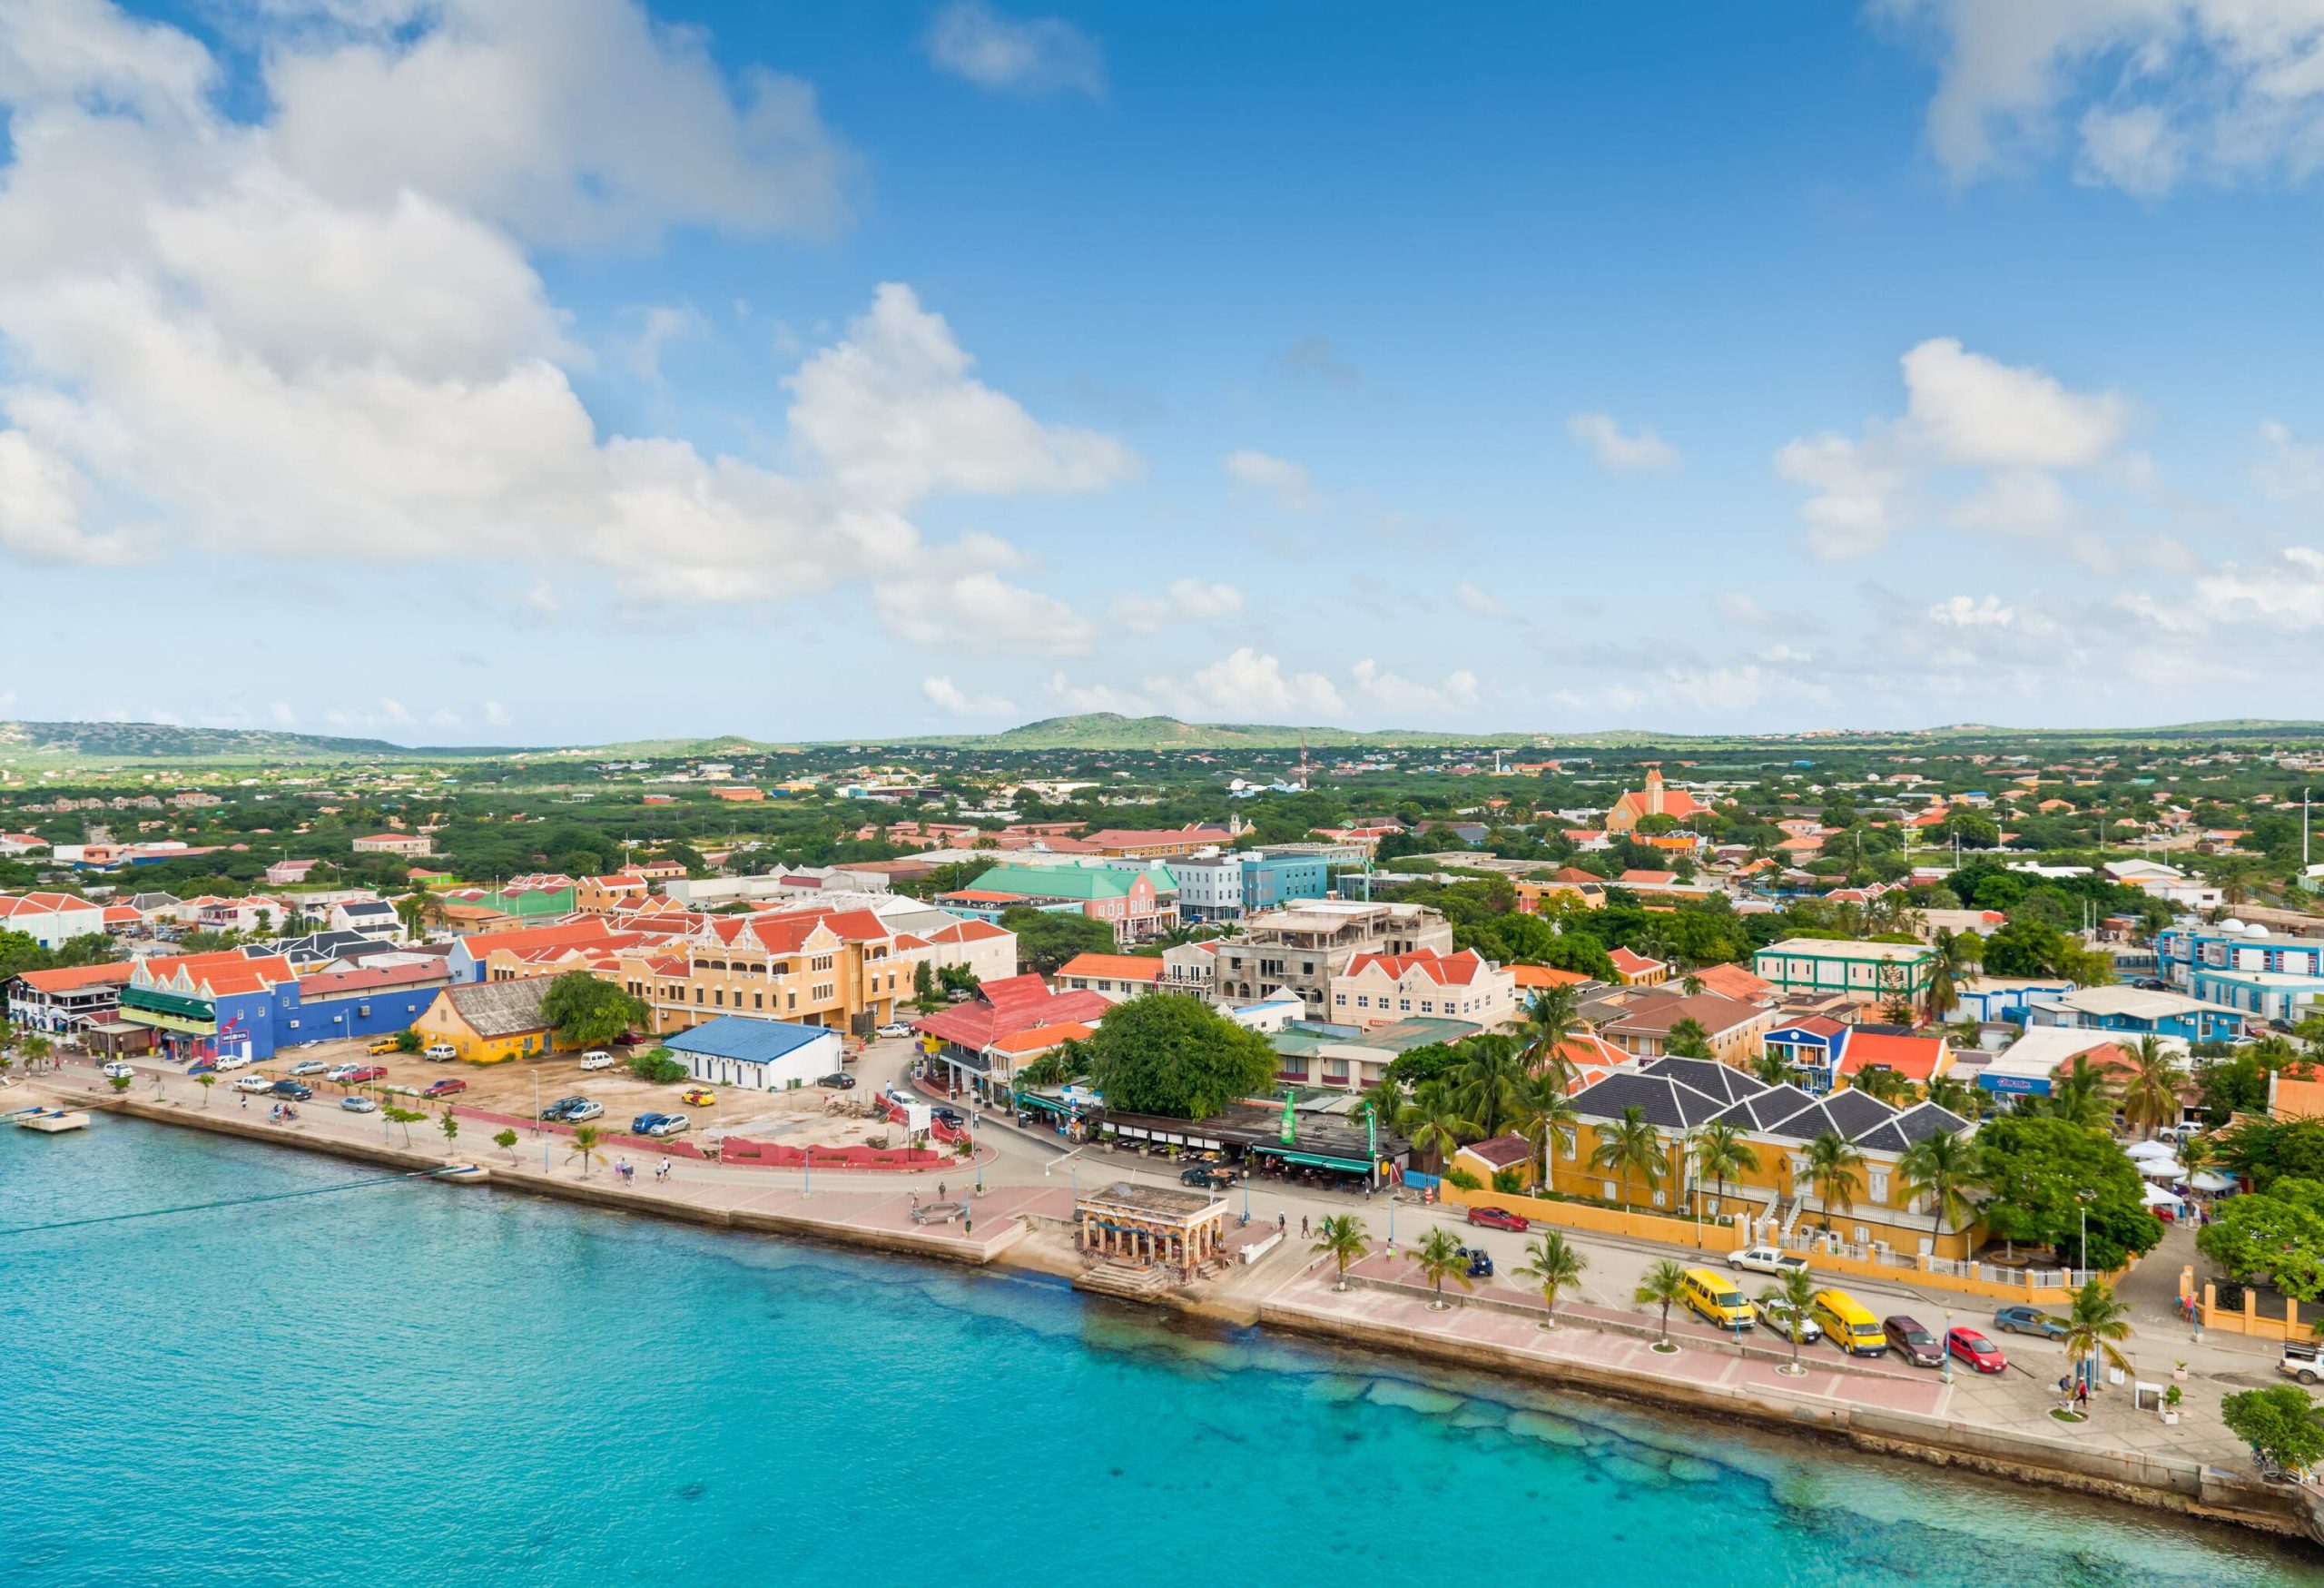 Aerial view of a colourful coastal city on a lush landscape surrounded by the sea under the cloudy blue sky.